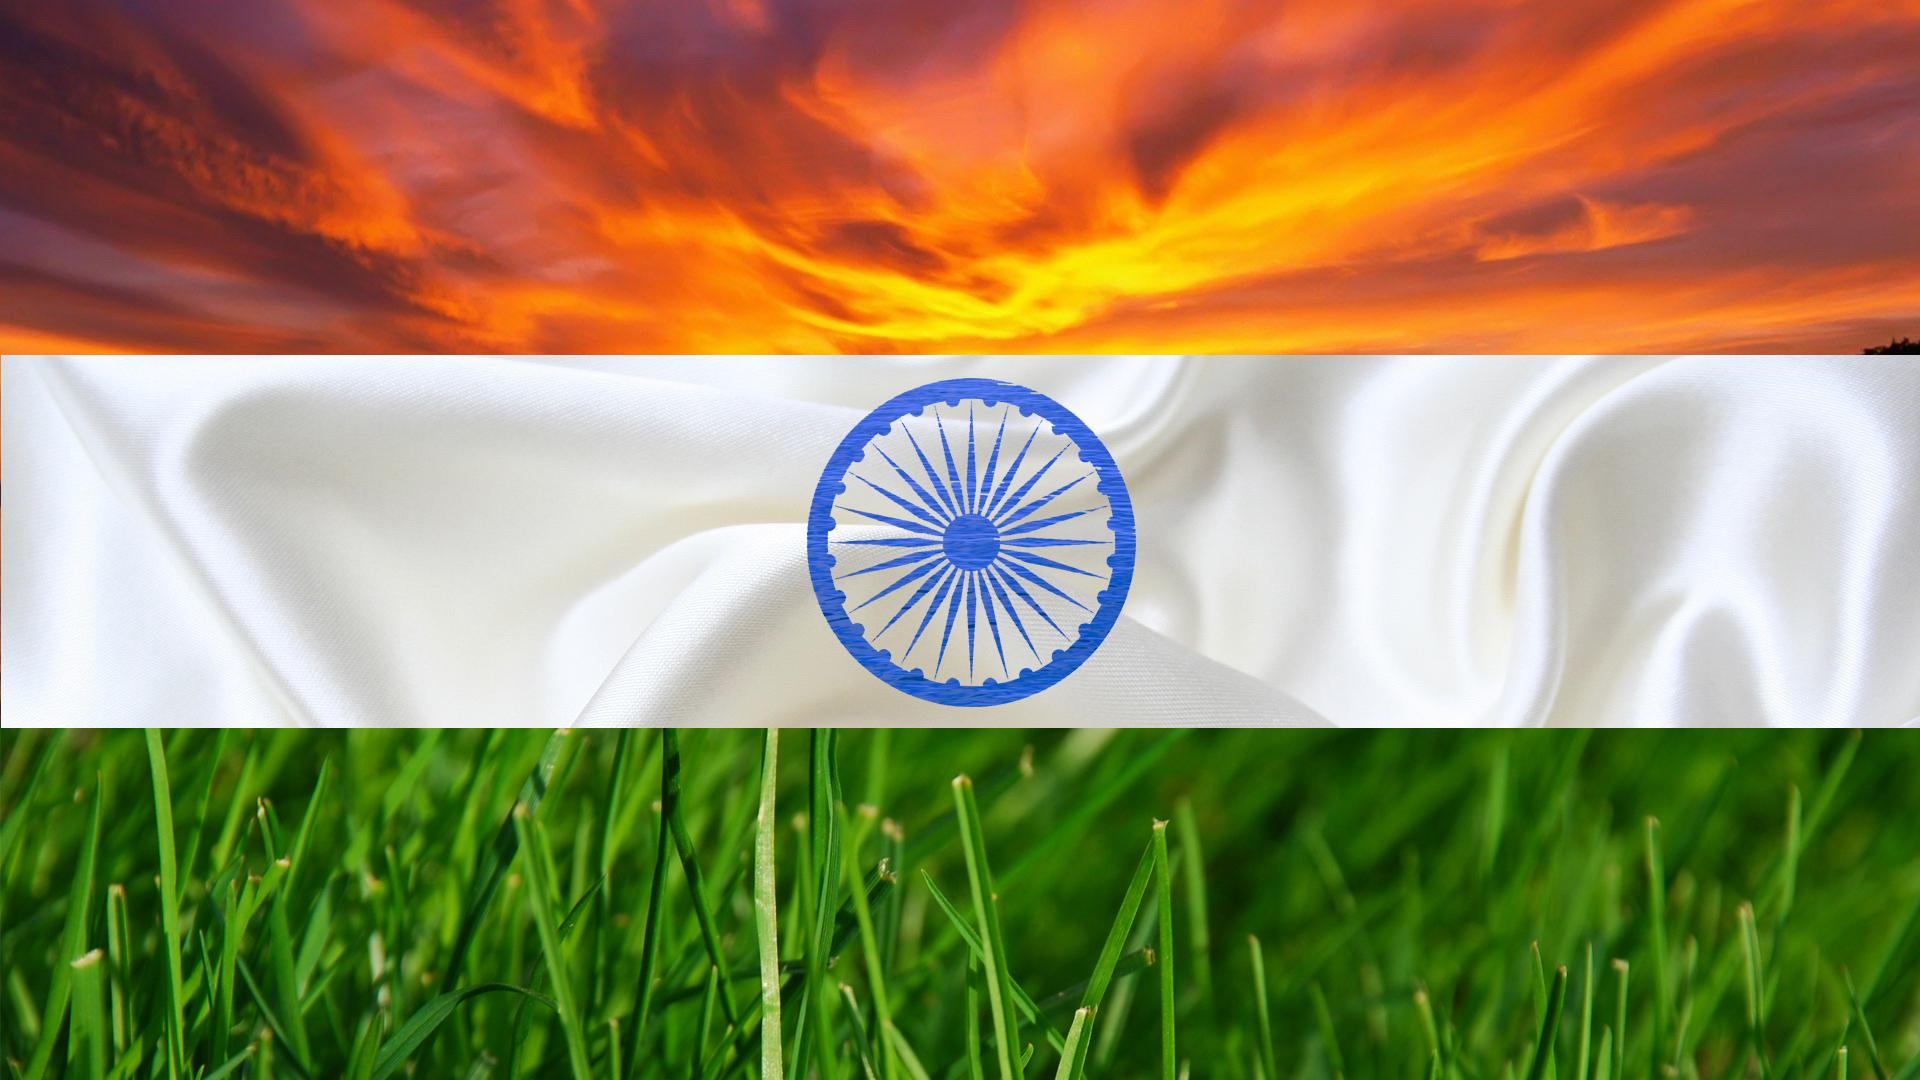 Indian Flag HD Wallpapers Images